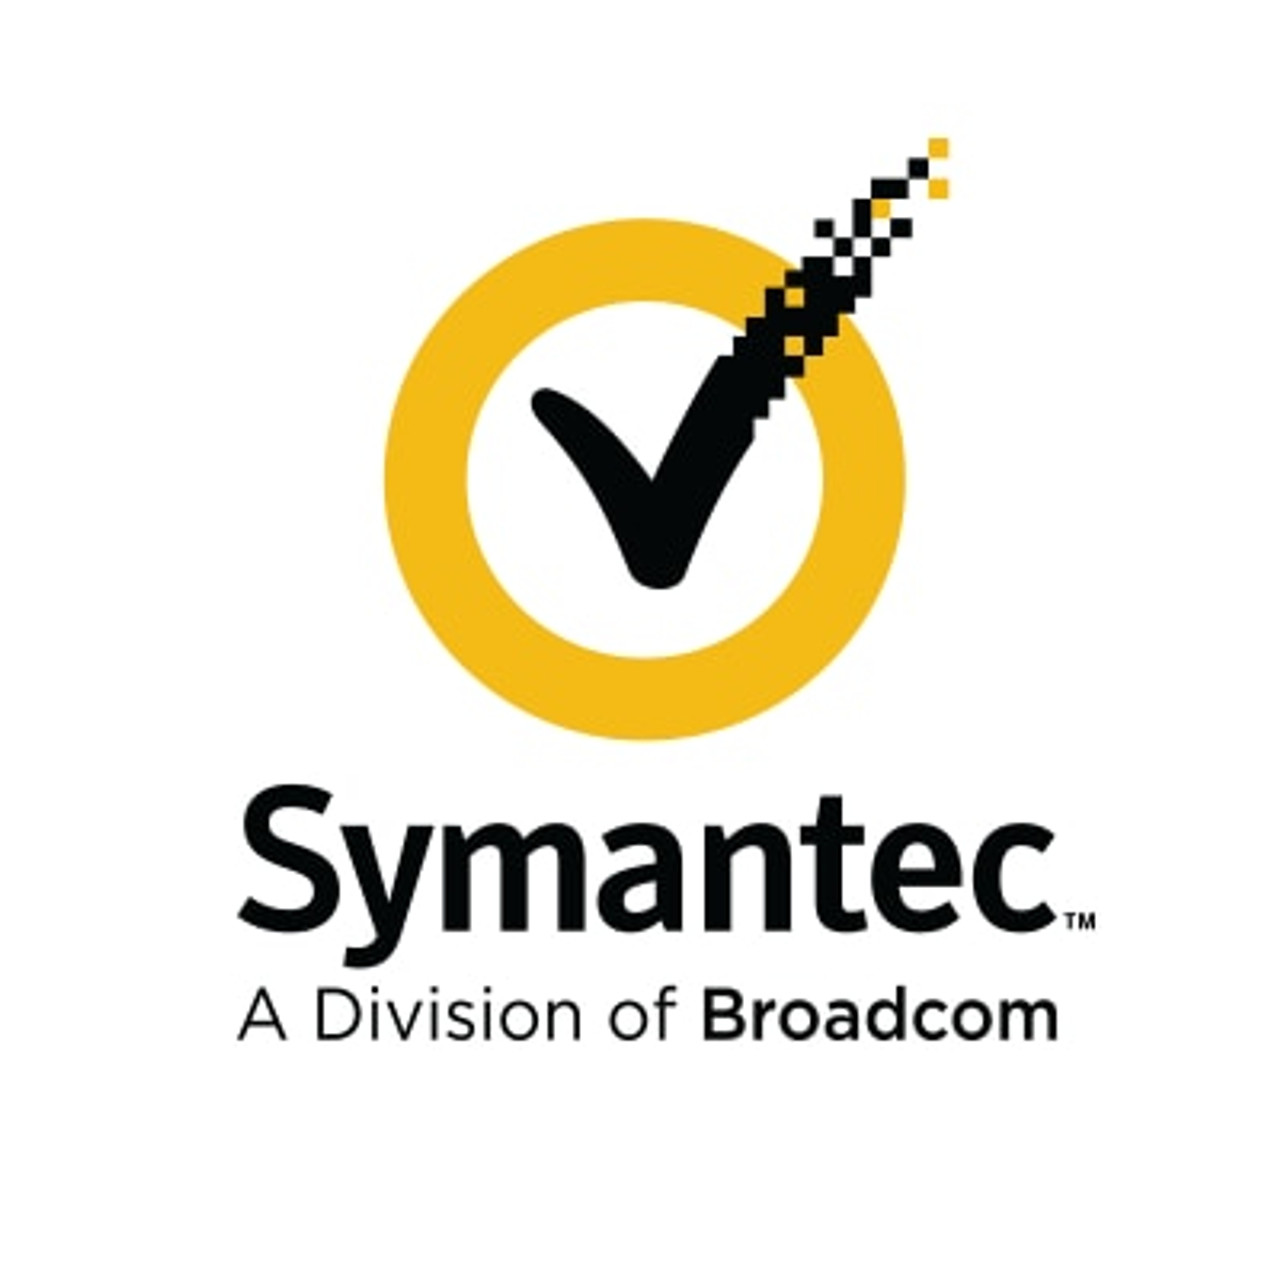 Symantec Advanced Endpoint Defense (without SEP), Initial Hybrid Subscription License with Support, 250-499 Devices 1 YR